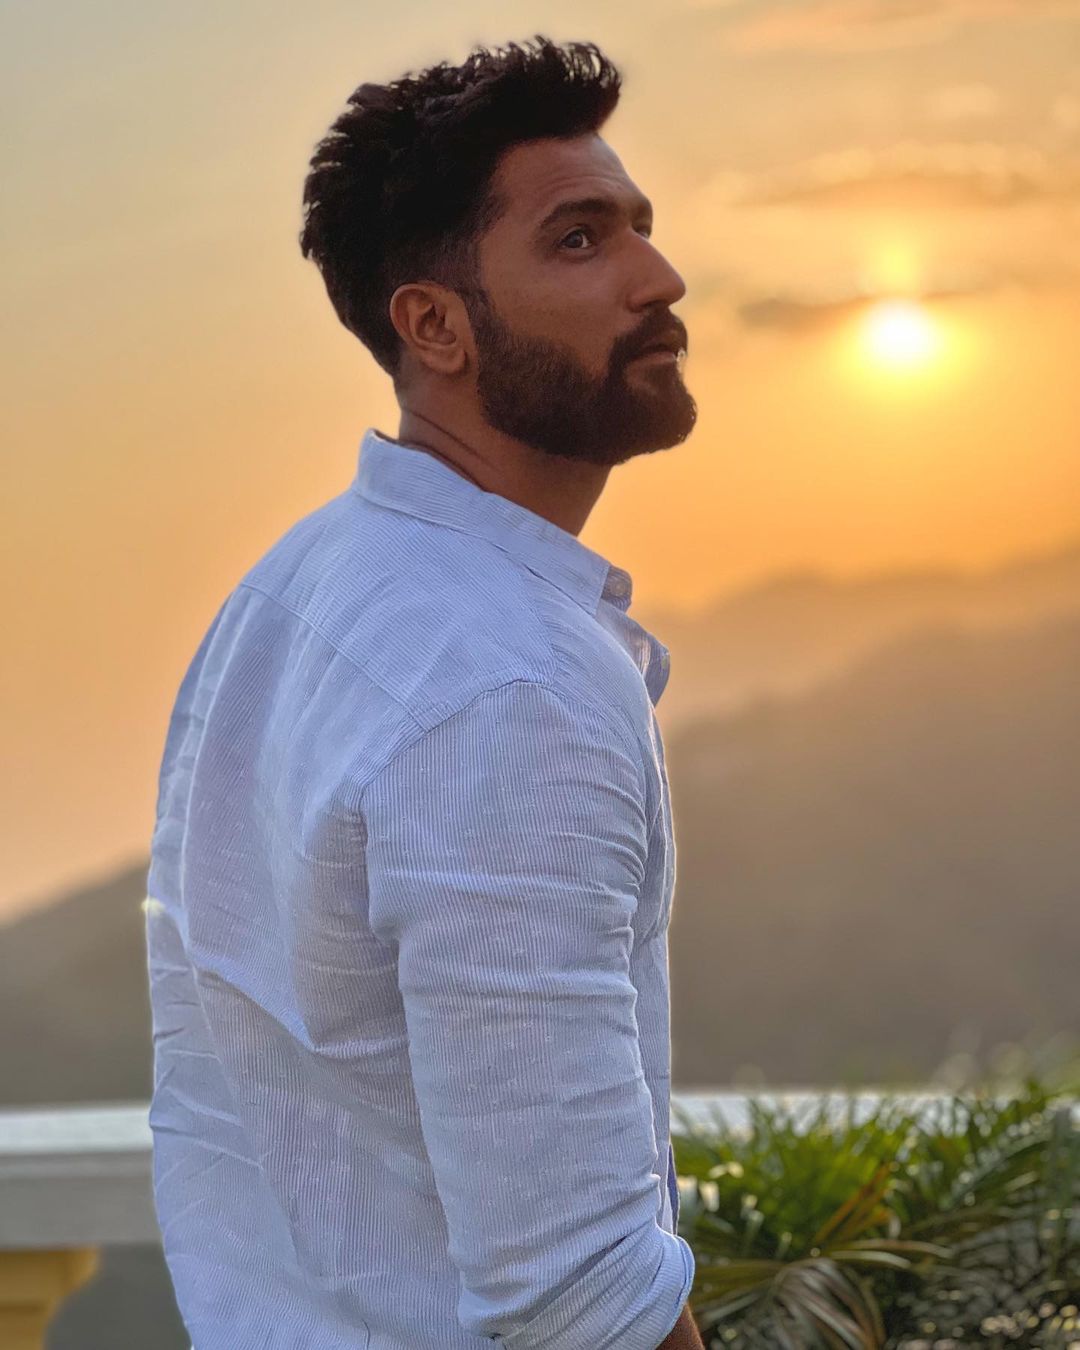 Vicky Kaushal looks dashing in the white linen shirt